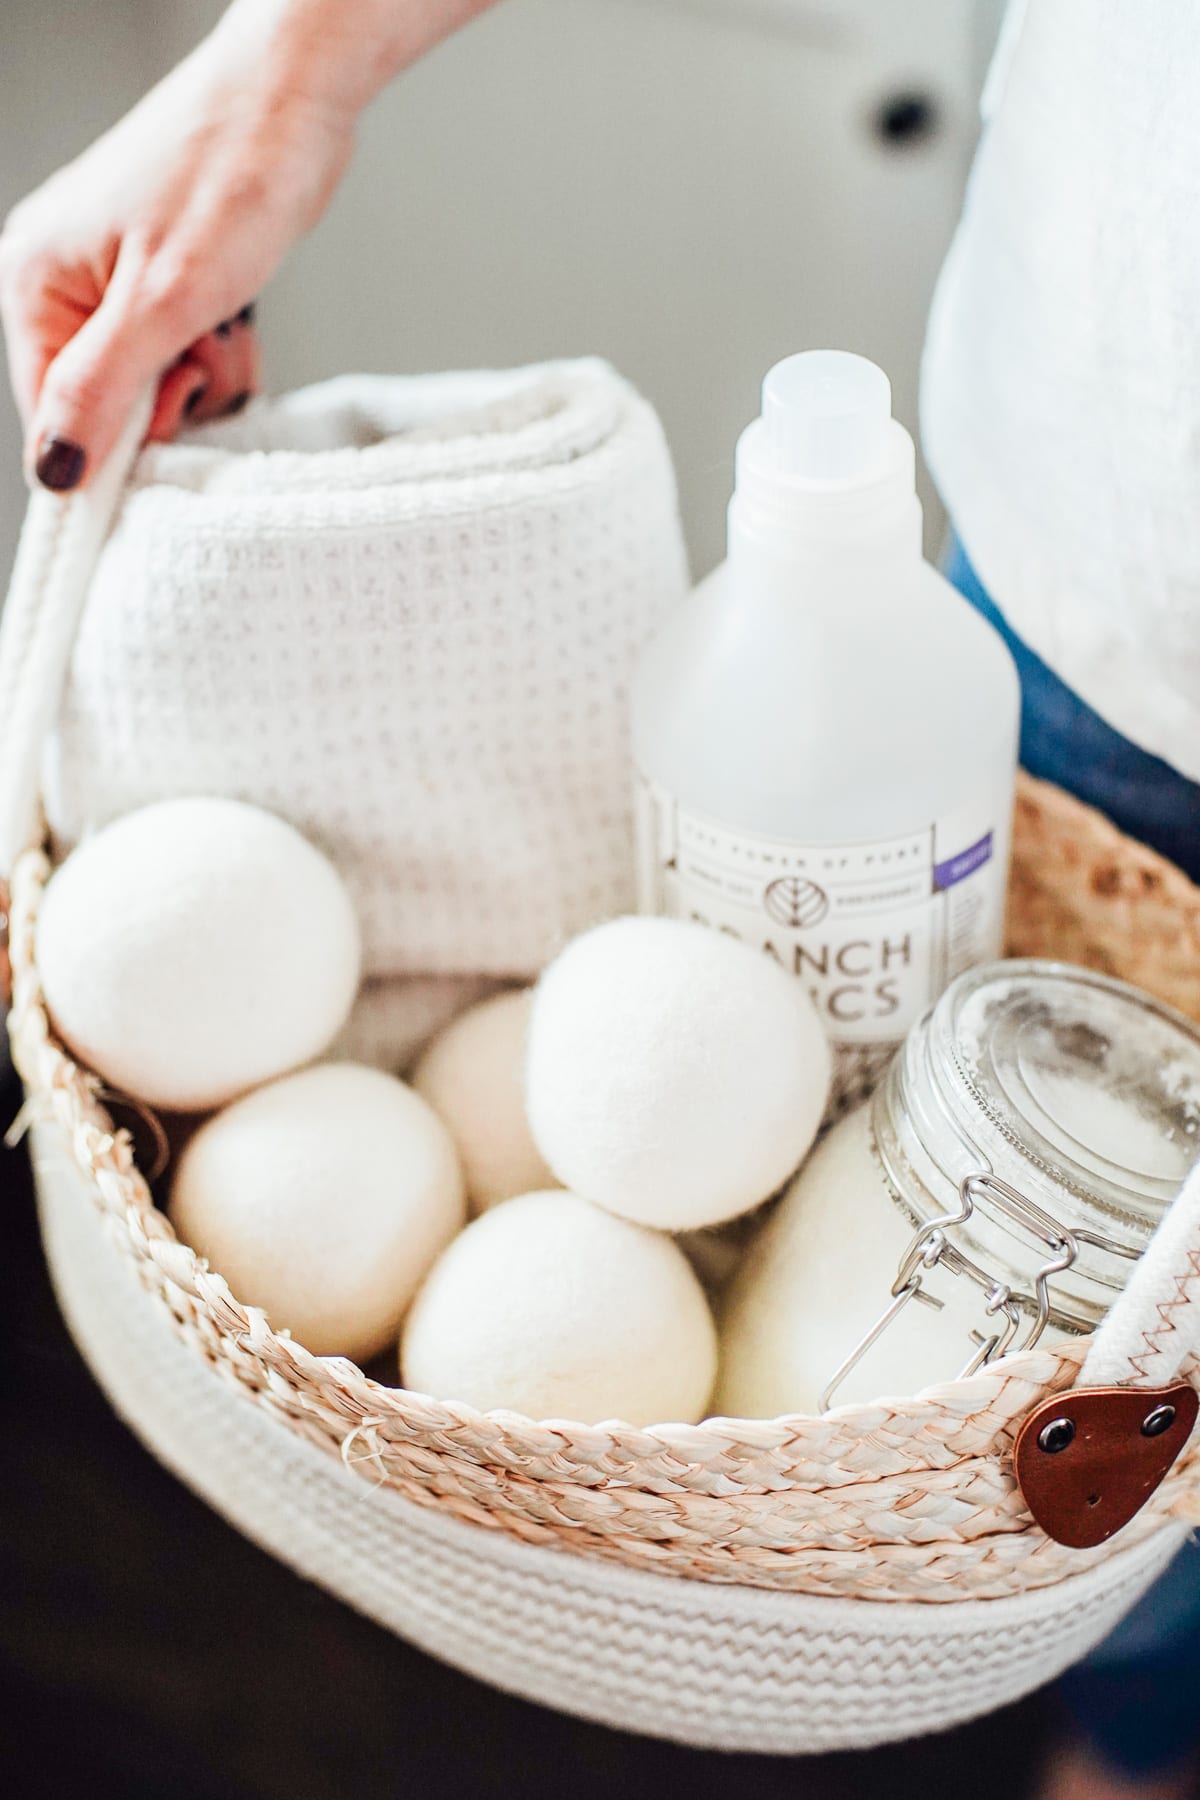 Laundry products (soap, softener, and wool dryer balls) in a laundry basket. 